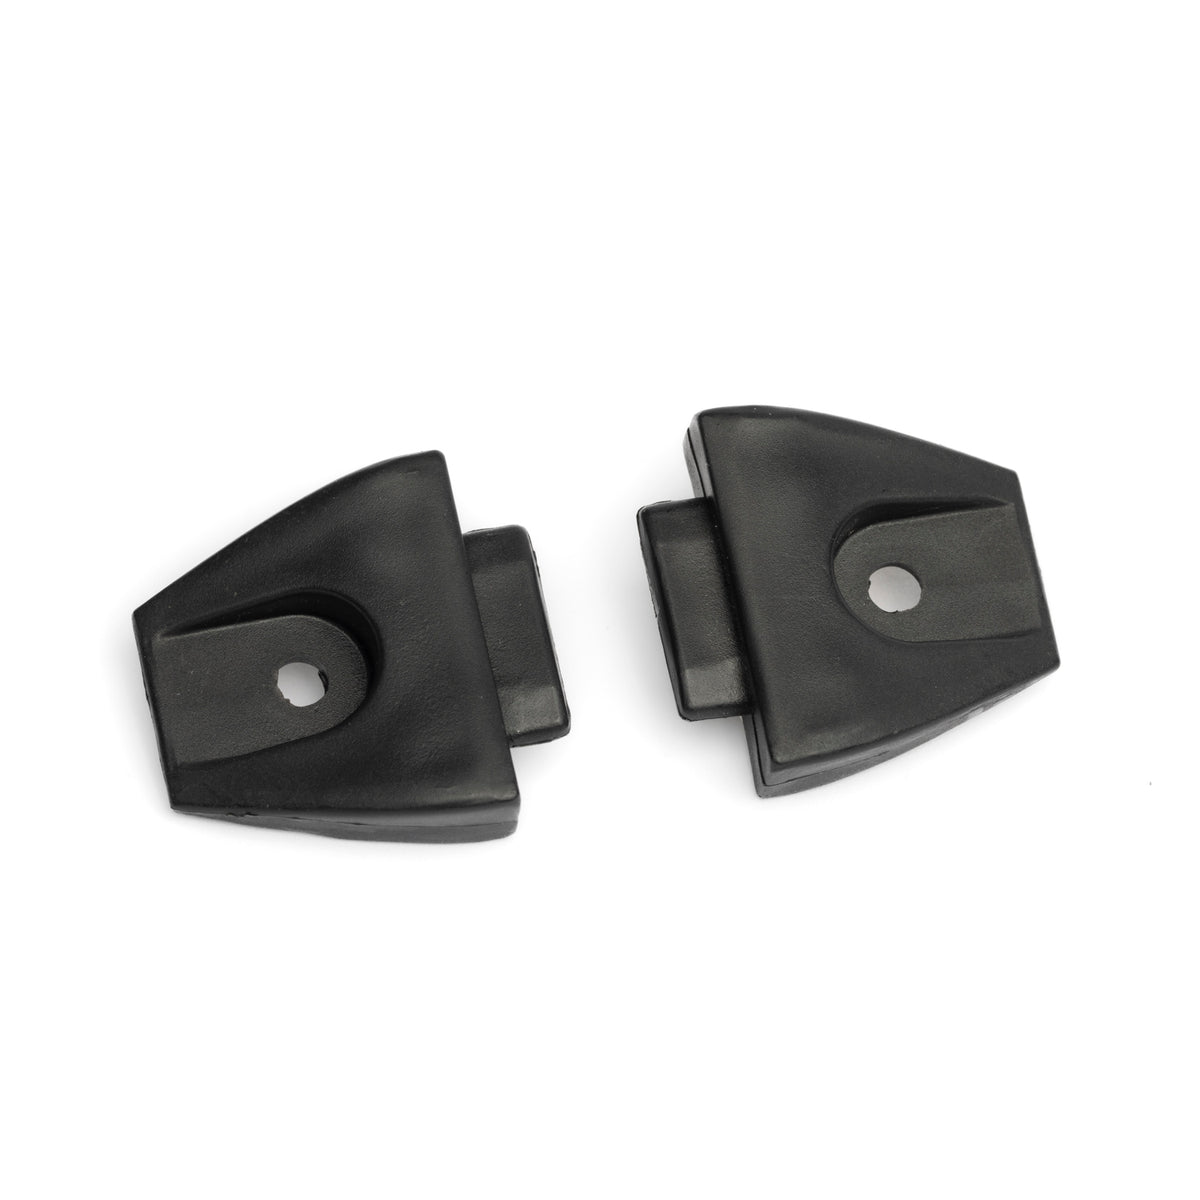 Wall L-Track End Cap - 2 Pack